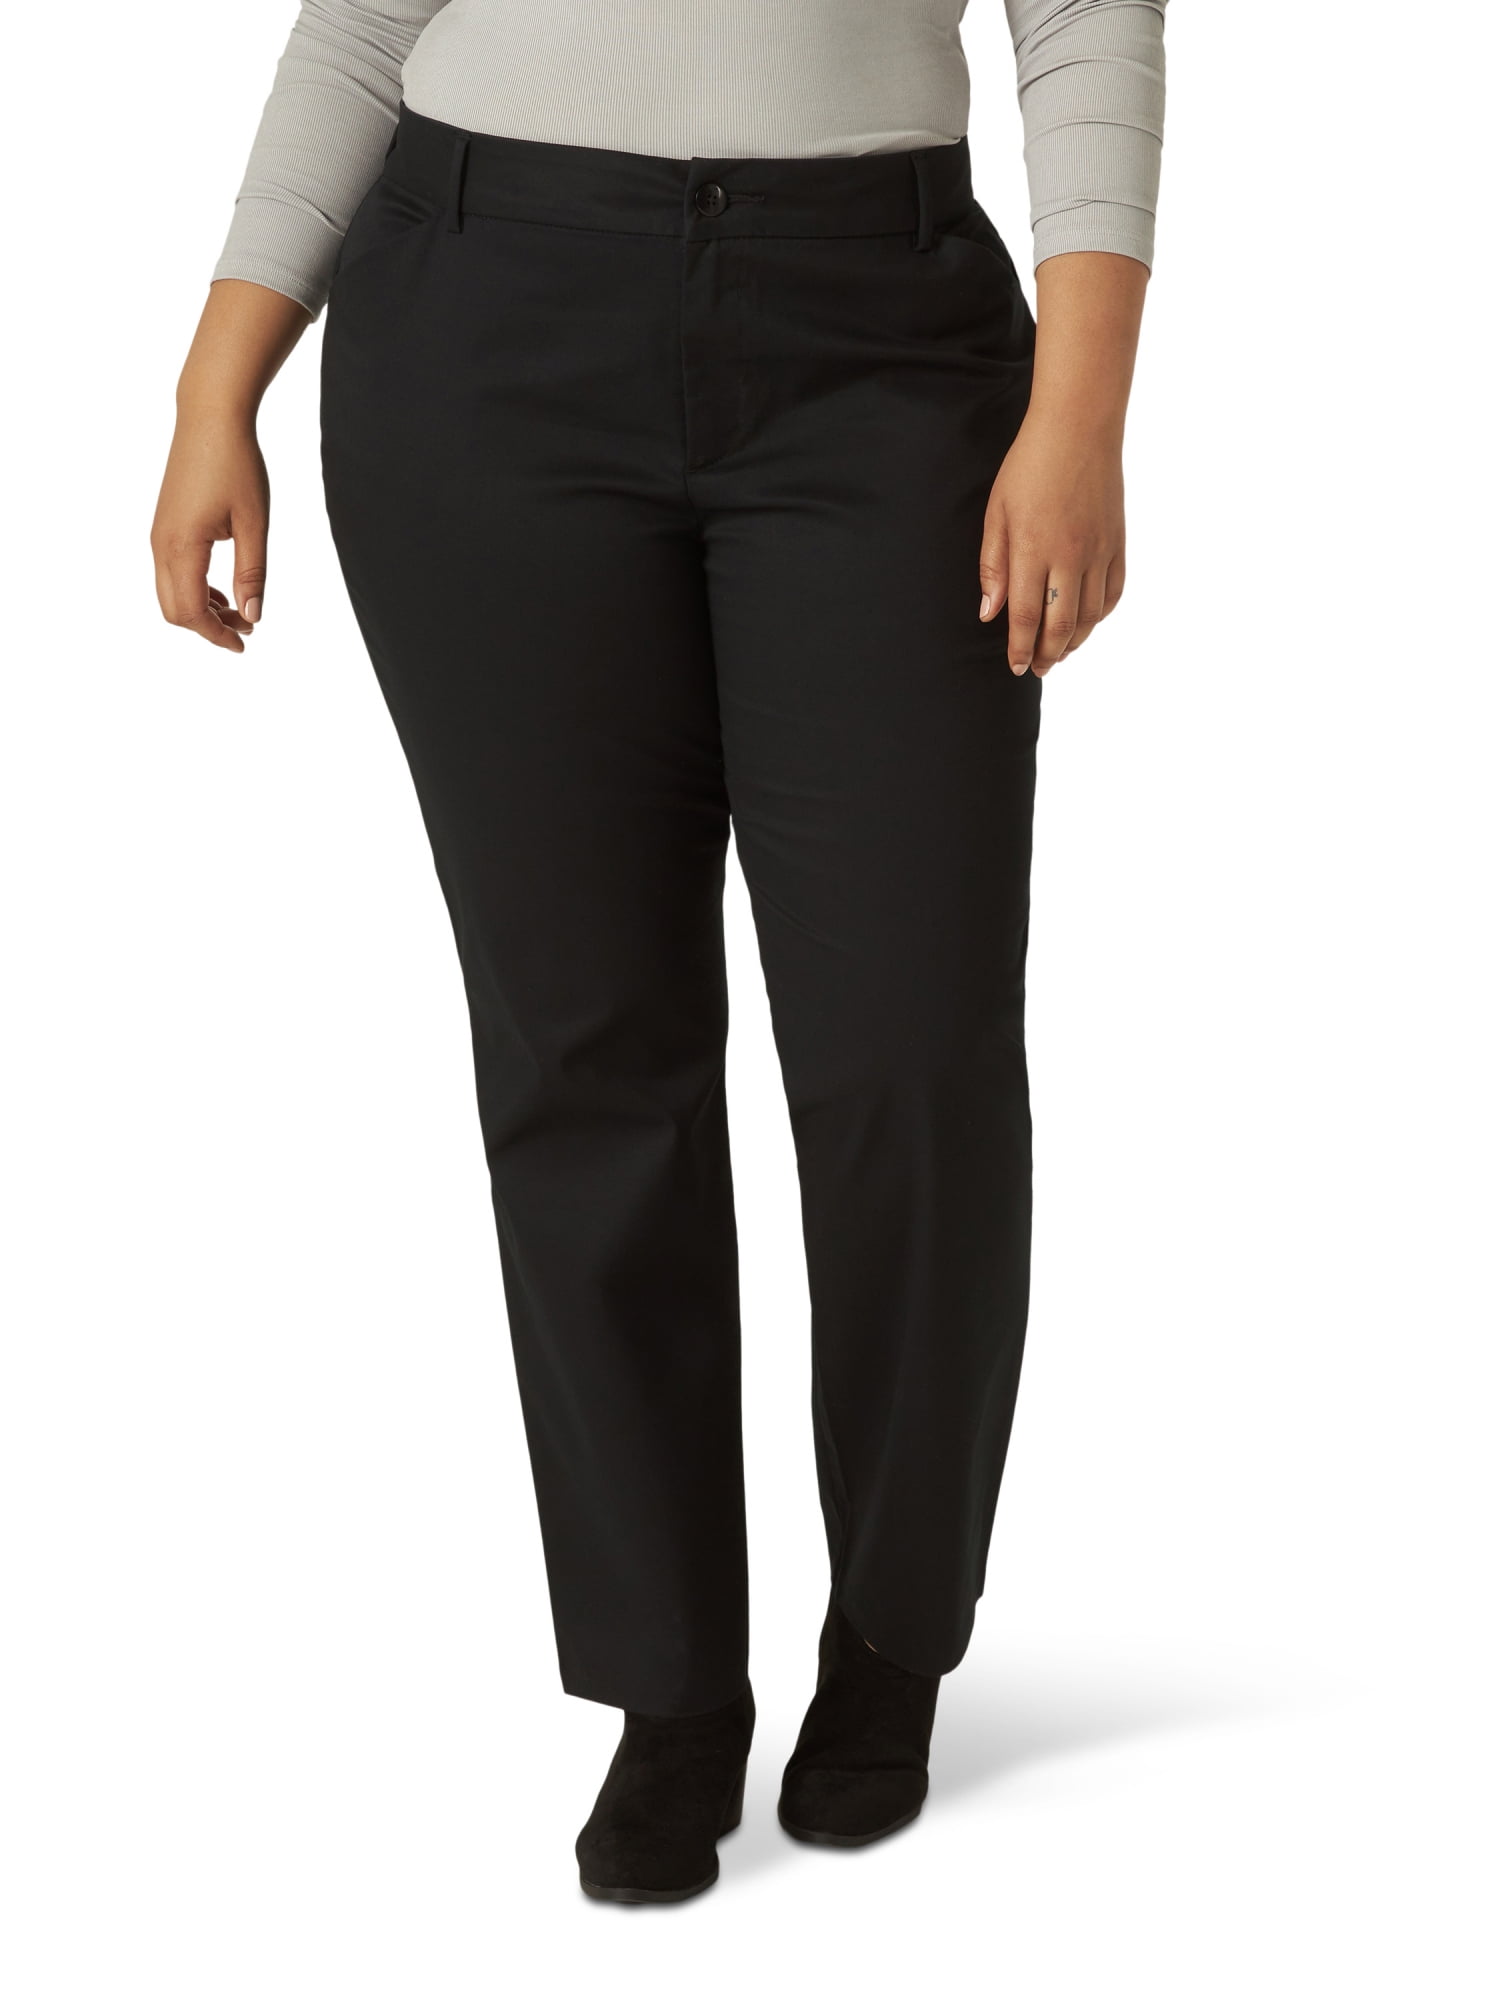 Lee Women's Plus Wrinkle Free Relaxed Fit Straight Leg Pant - Walmart.com